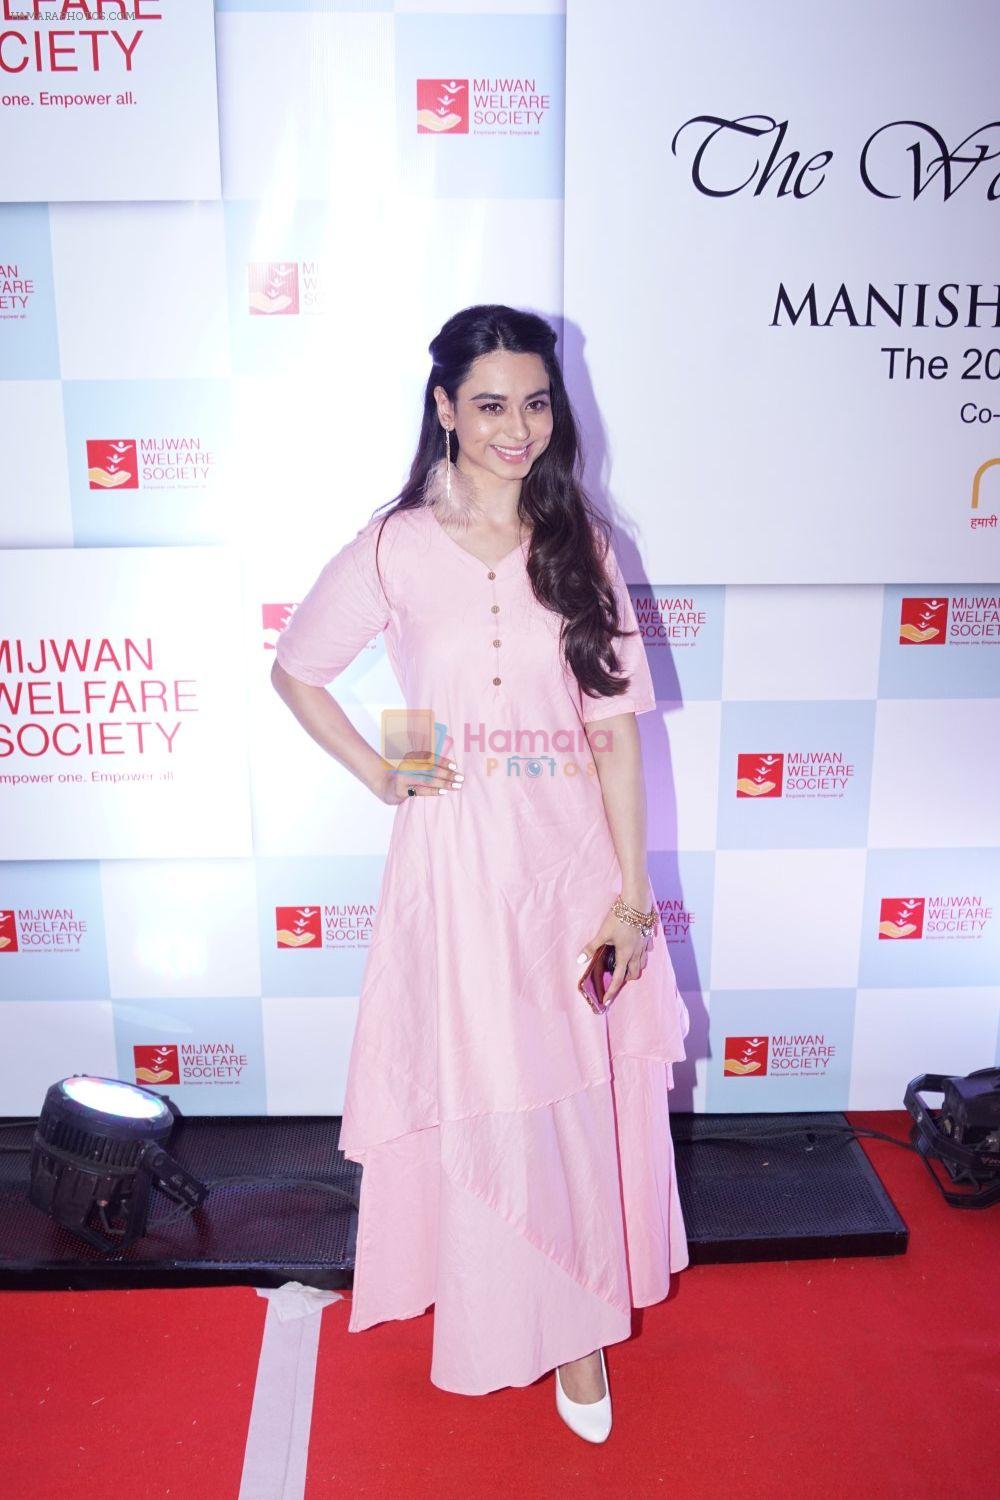 at the Red Carpet Of 9th The Walk Of Mijwan on 19th April 2018